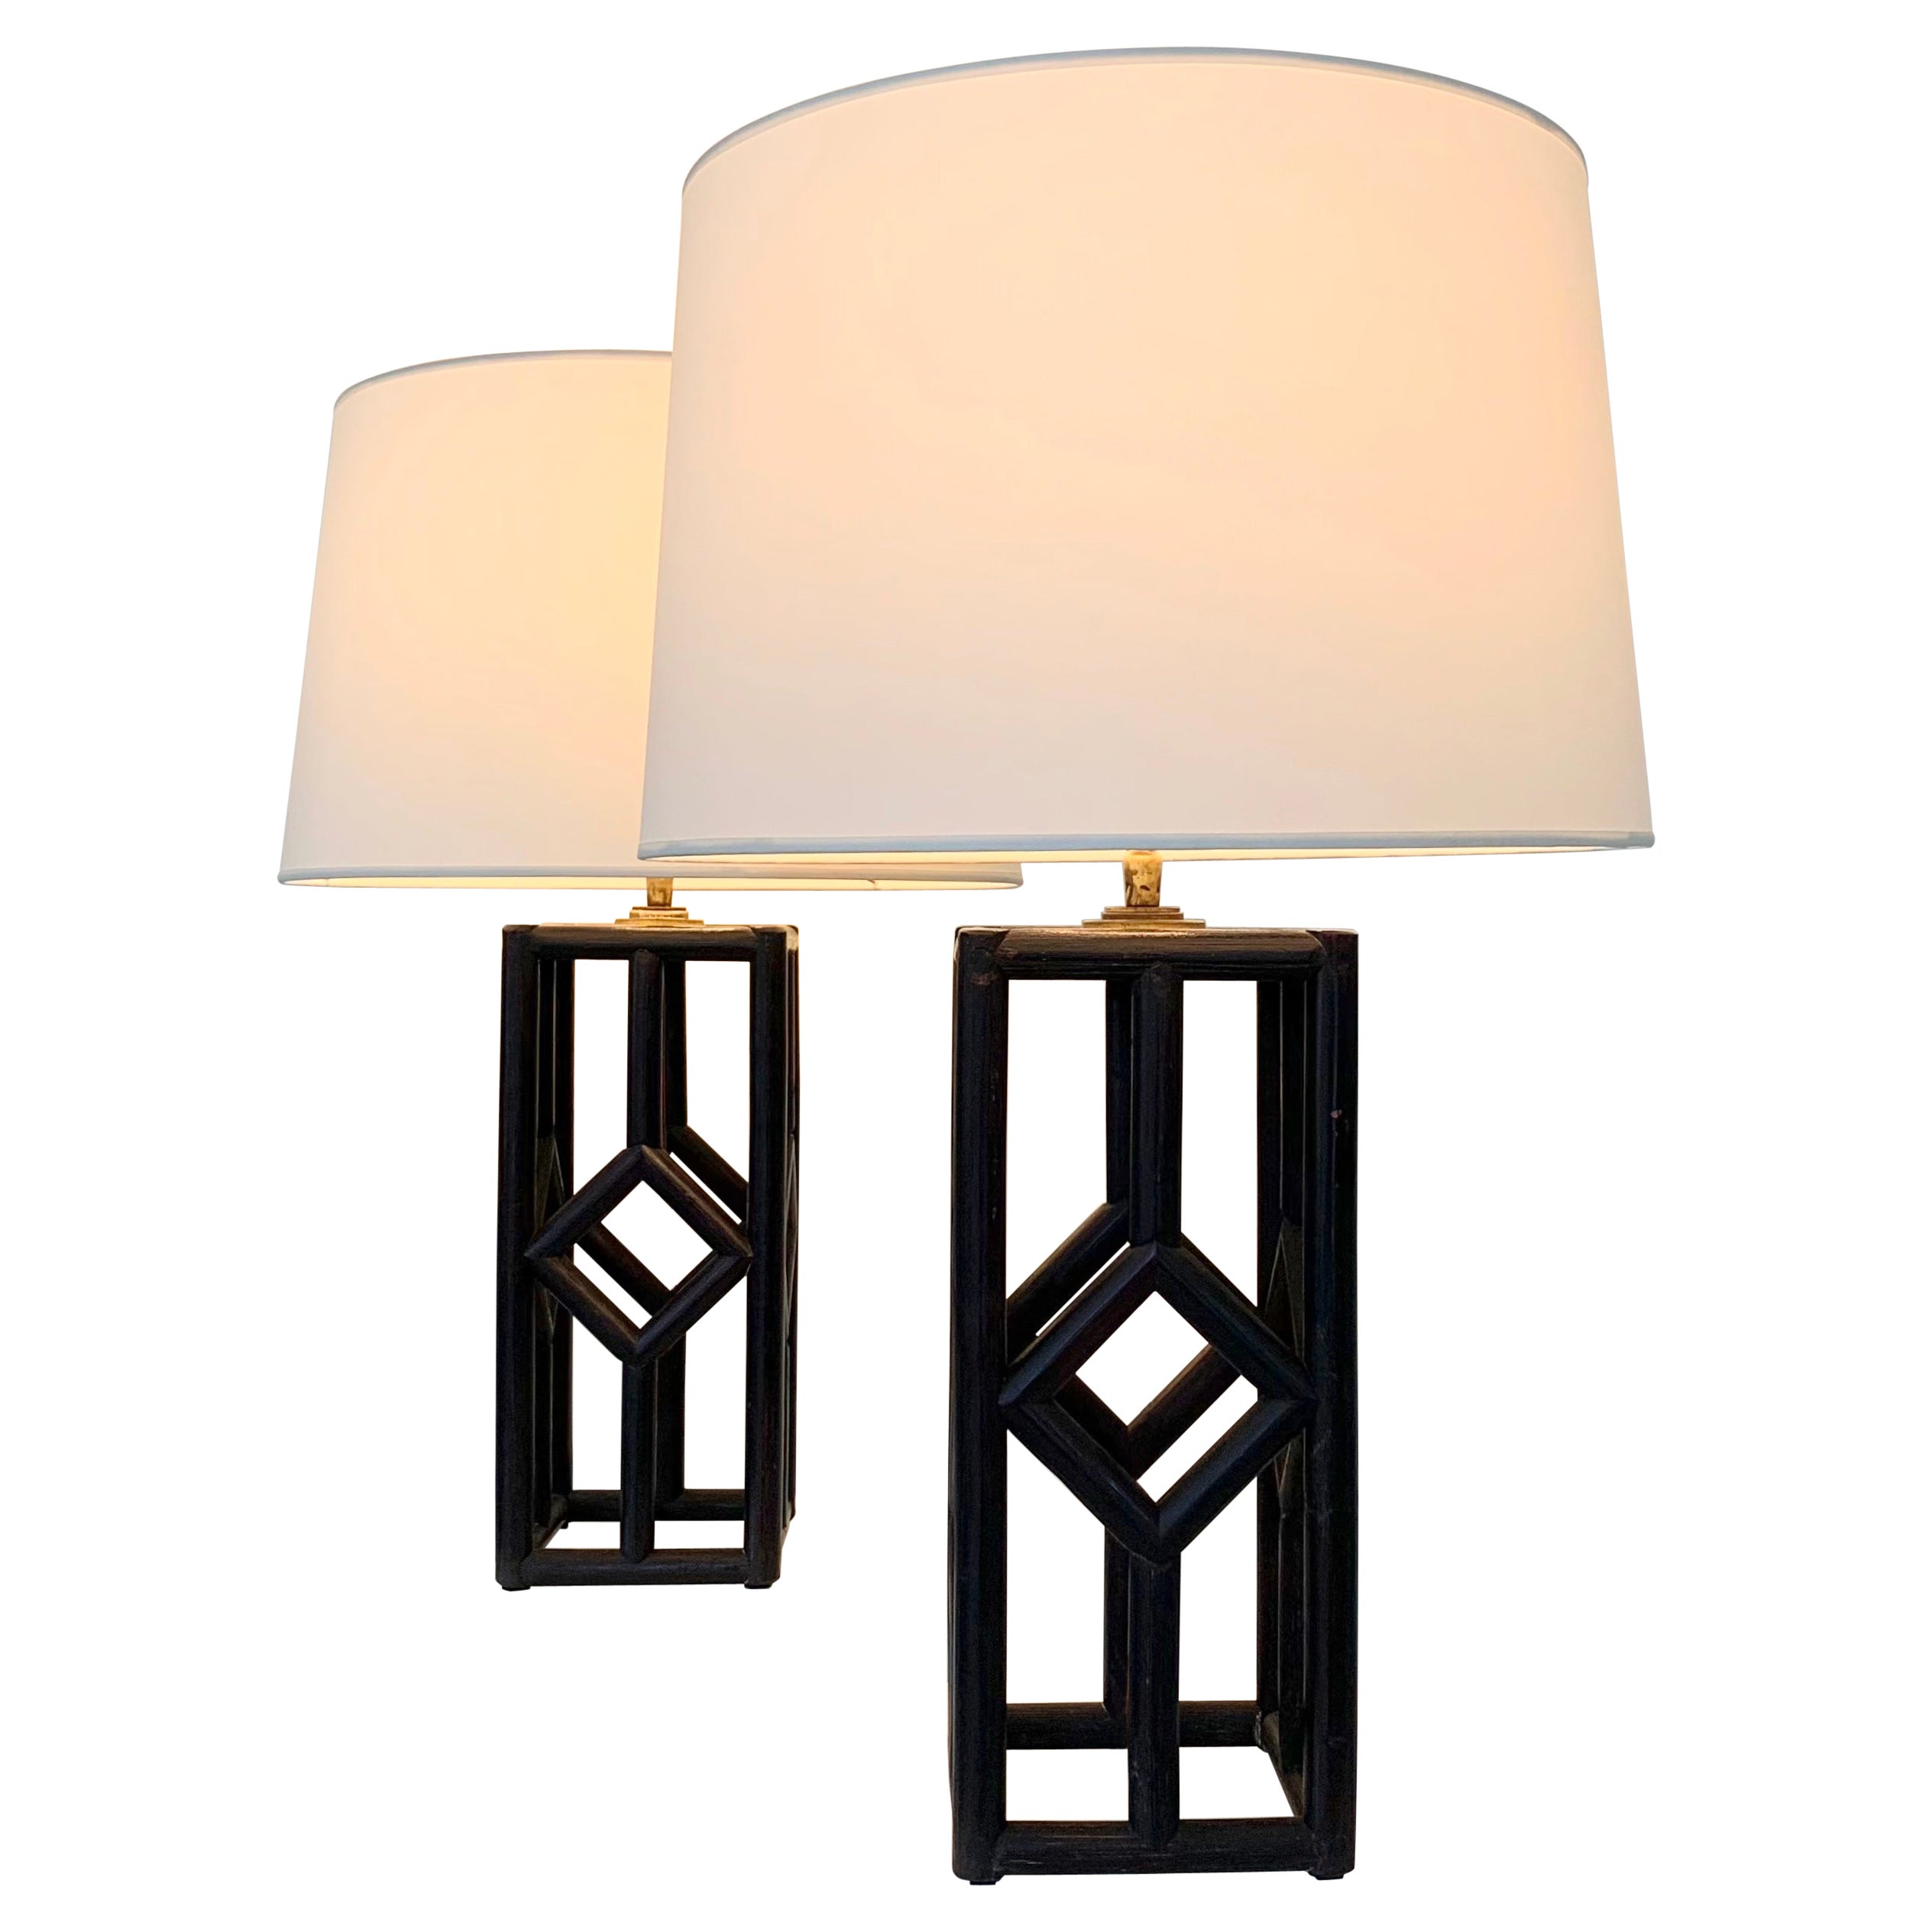 Highly decorative mid-century pair of lamps, circa 1960, Italy.
Bamboo, new white fabric shades.
One E27 or E26 bulb.
Dimensions: 65 cm total height, diameter of the shade: 40 cm.
Good condition.
All purchases are covered by our Buyer Protection